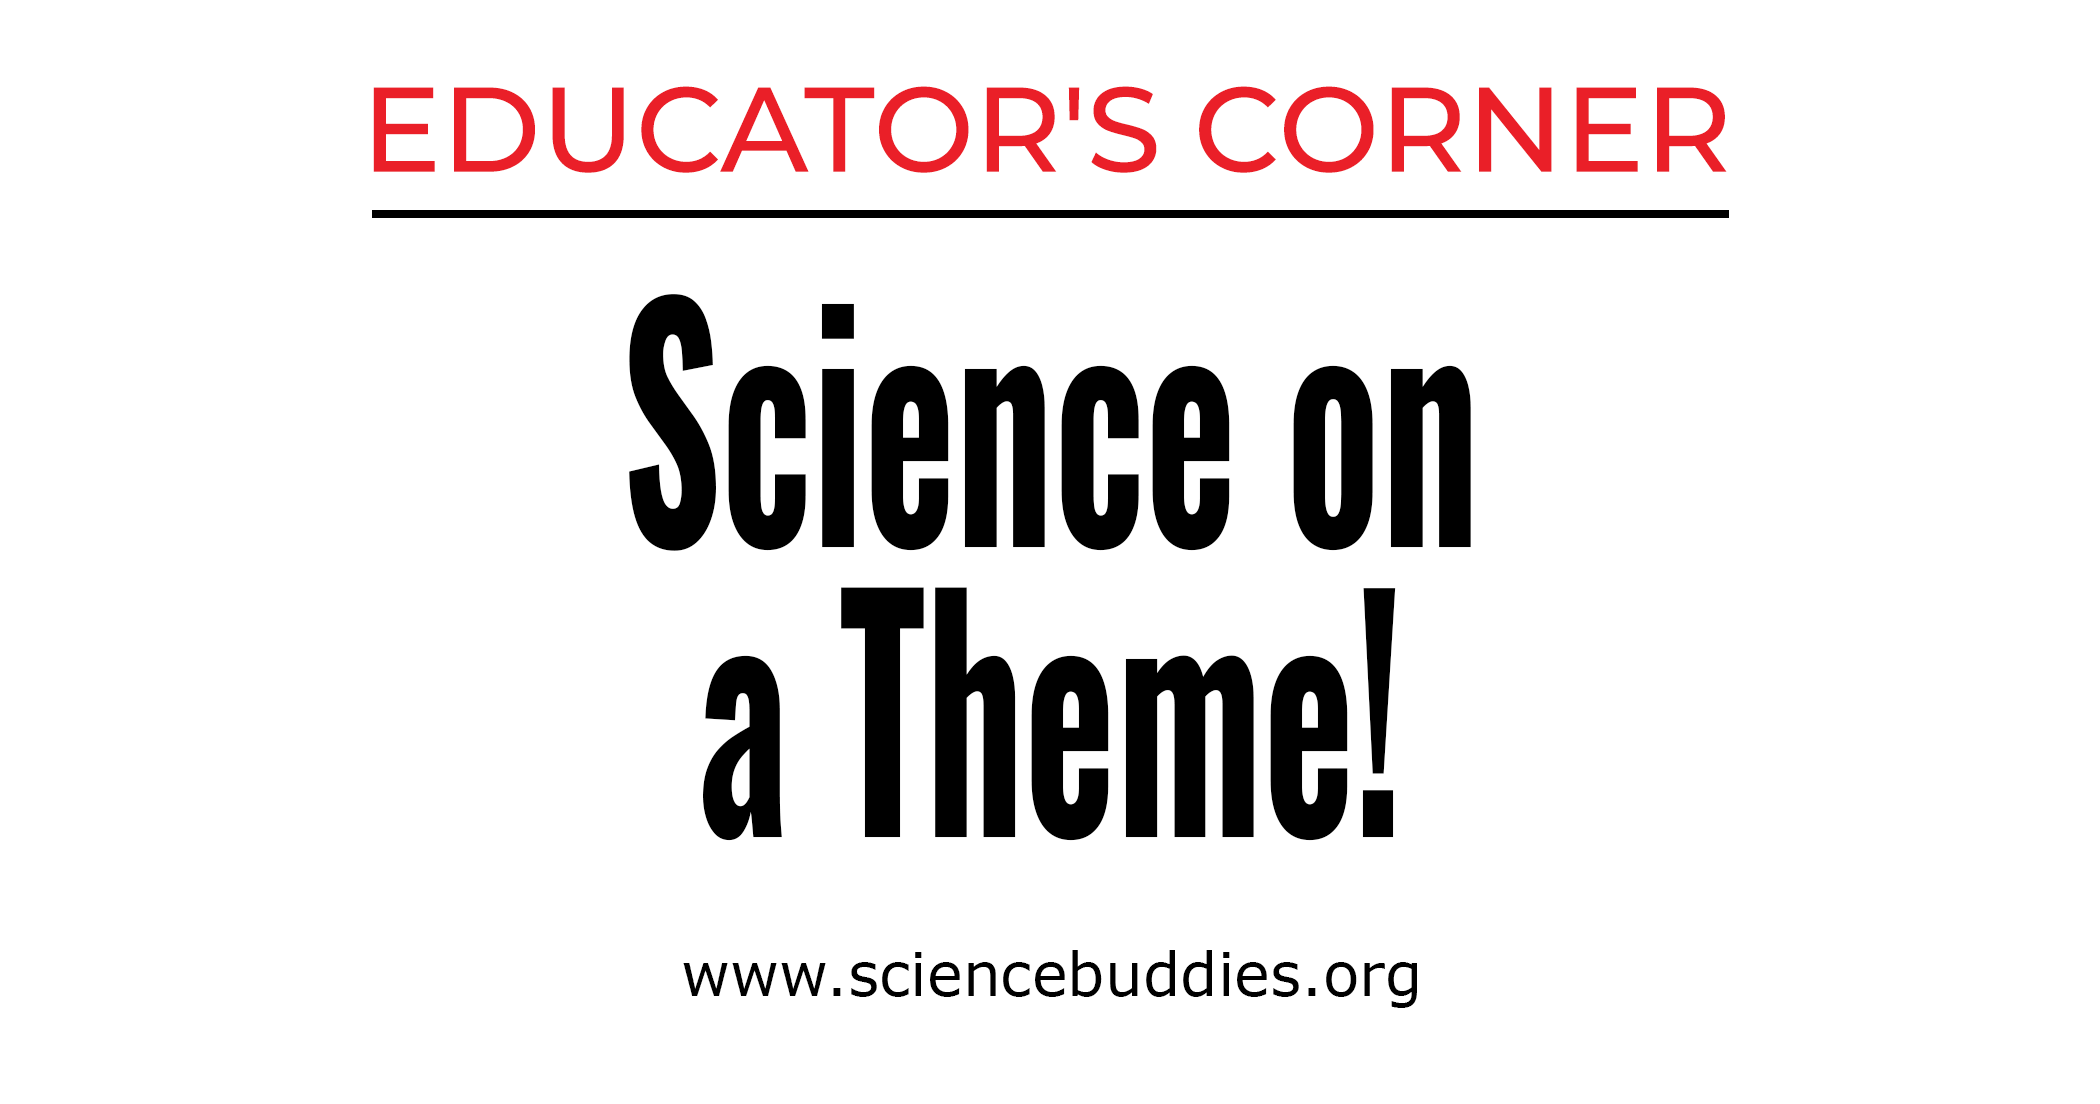 Educator's Corner Curated Science Experiments on Fun Themes for K-12 from Science Buddies